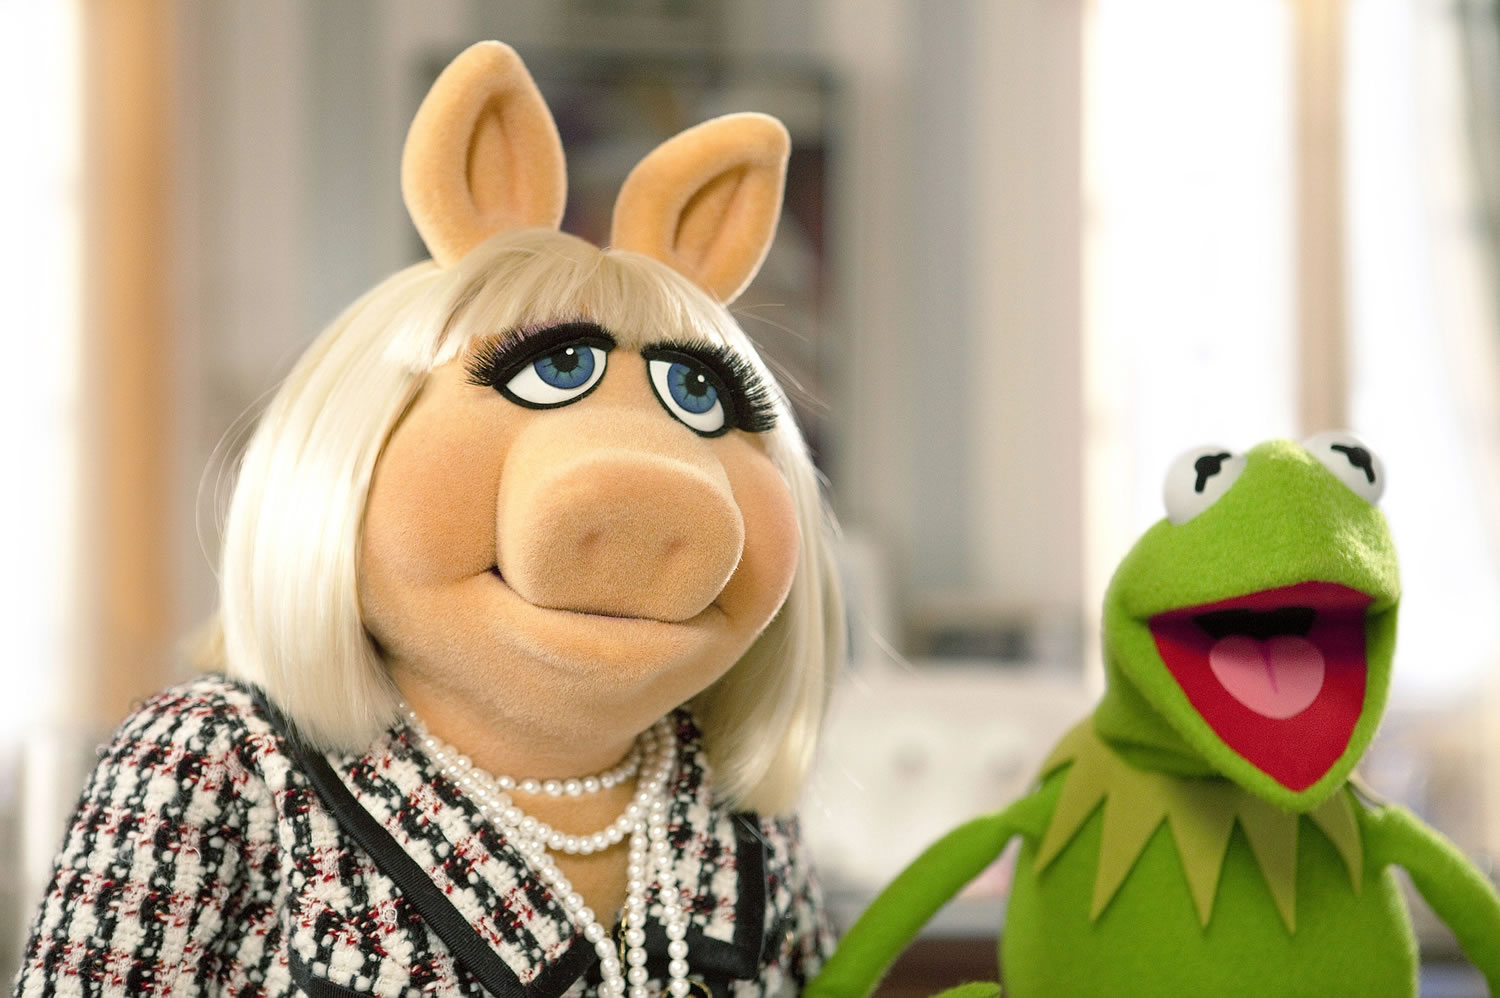 Disney
Miss Piggy and Kermit the Frog are returning to television this fall in a reboot of the &quot;Muppet Show&quot; on ABC. The show is one of the few new comedies announced by major networks in the more desirable time slots.